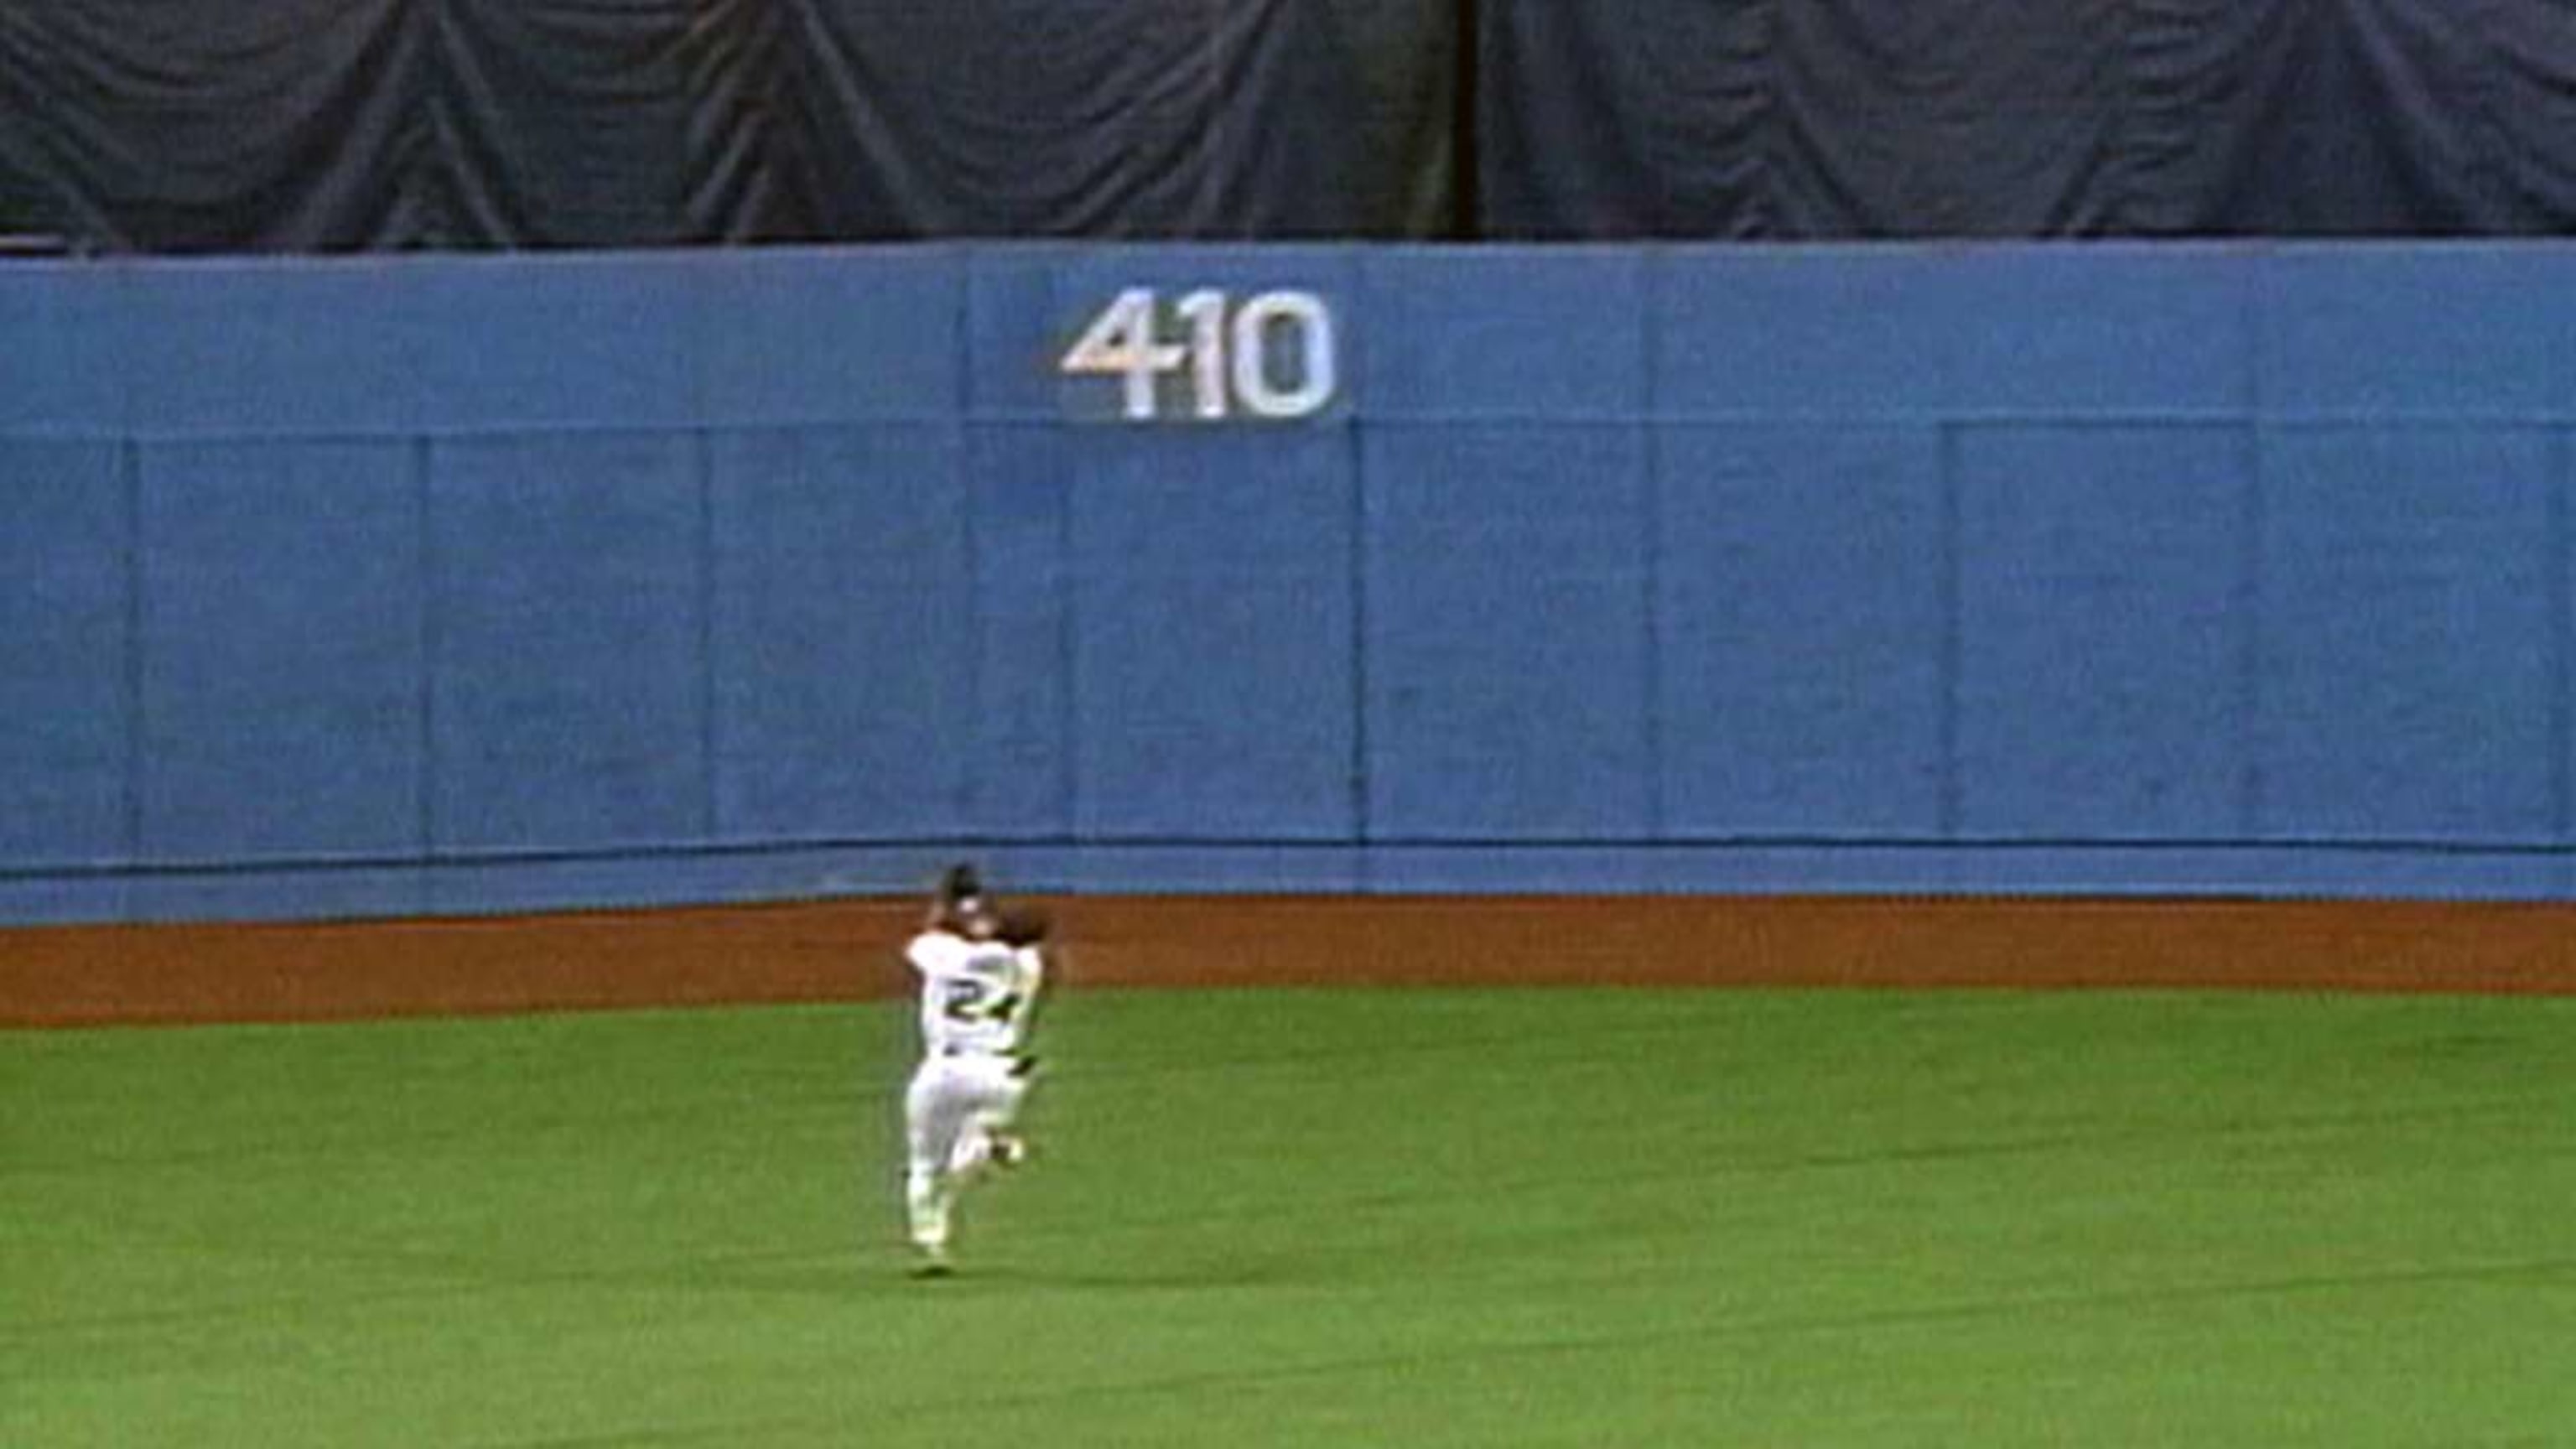 Wake Up With Ken Griffey Jr Making A Running Catch In Their Turn